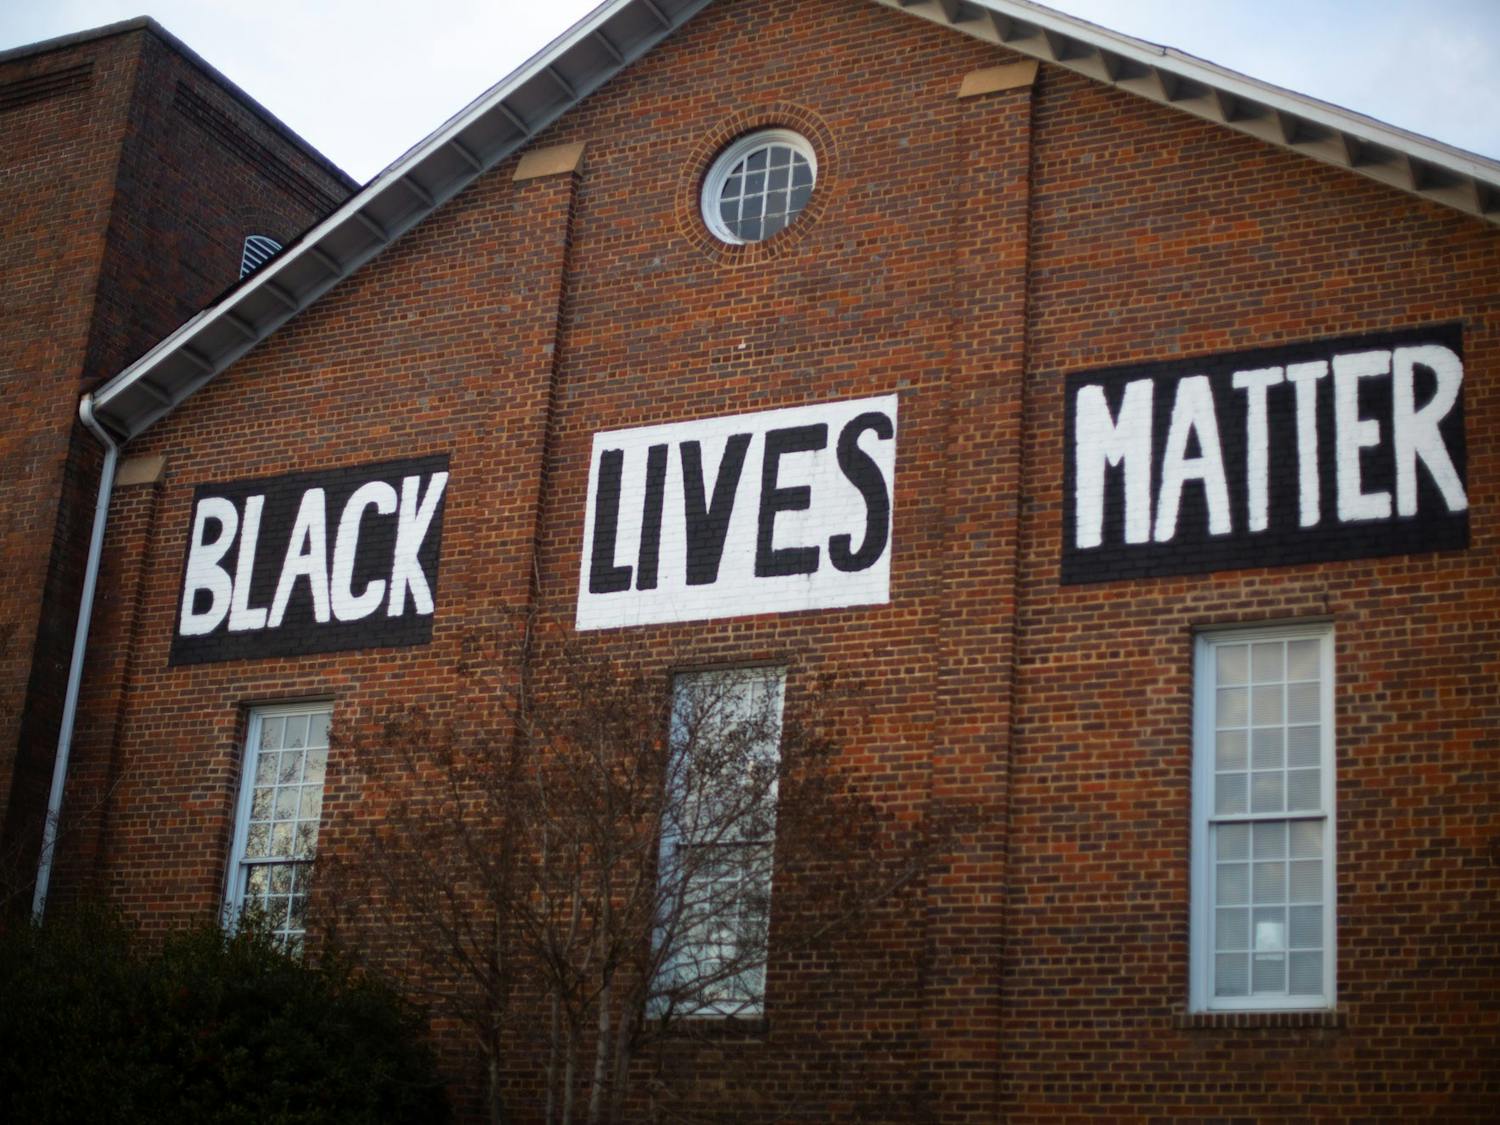 A Black Lives Matter mural at the intersection of West Main and Jones Ferry In Carrboro on Feb. 1, 2021.